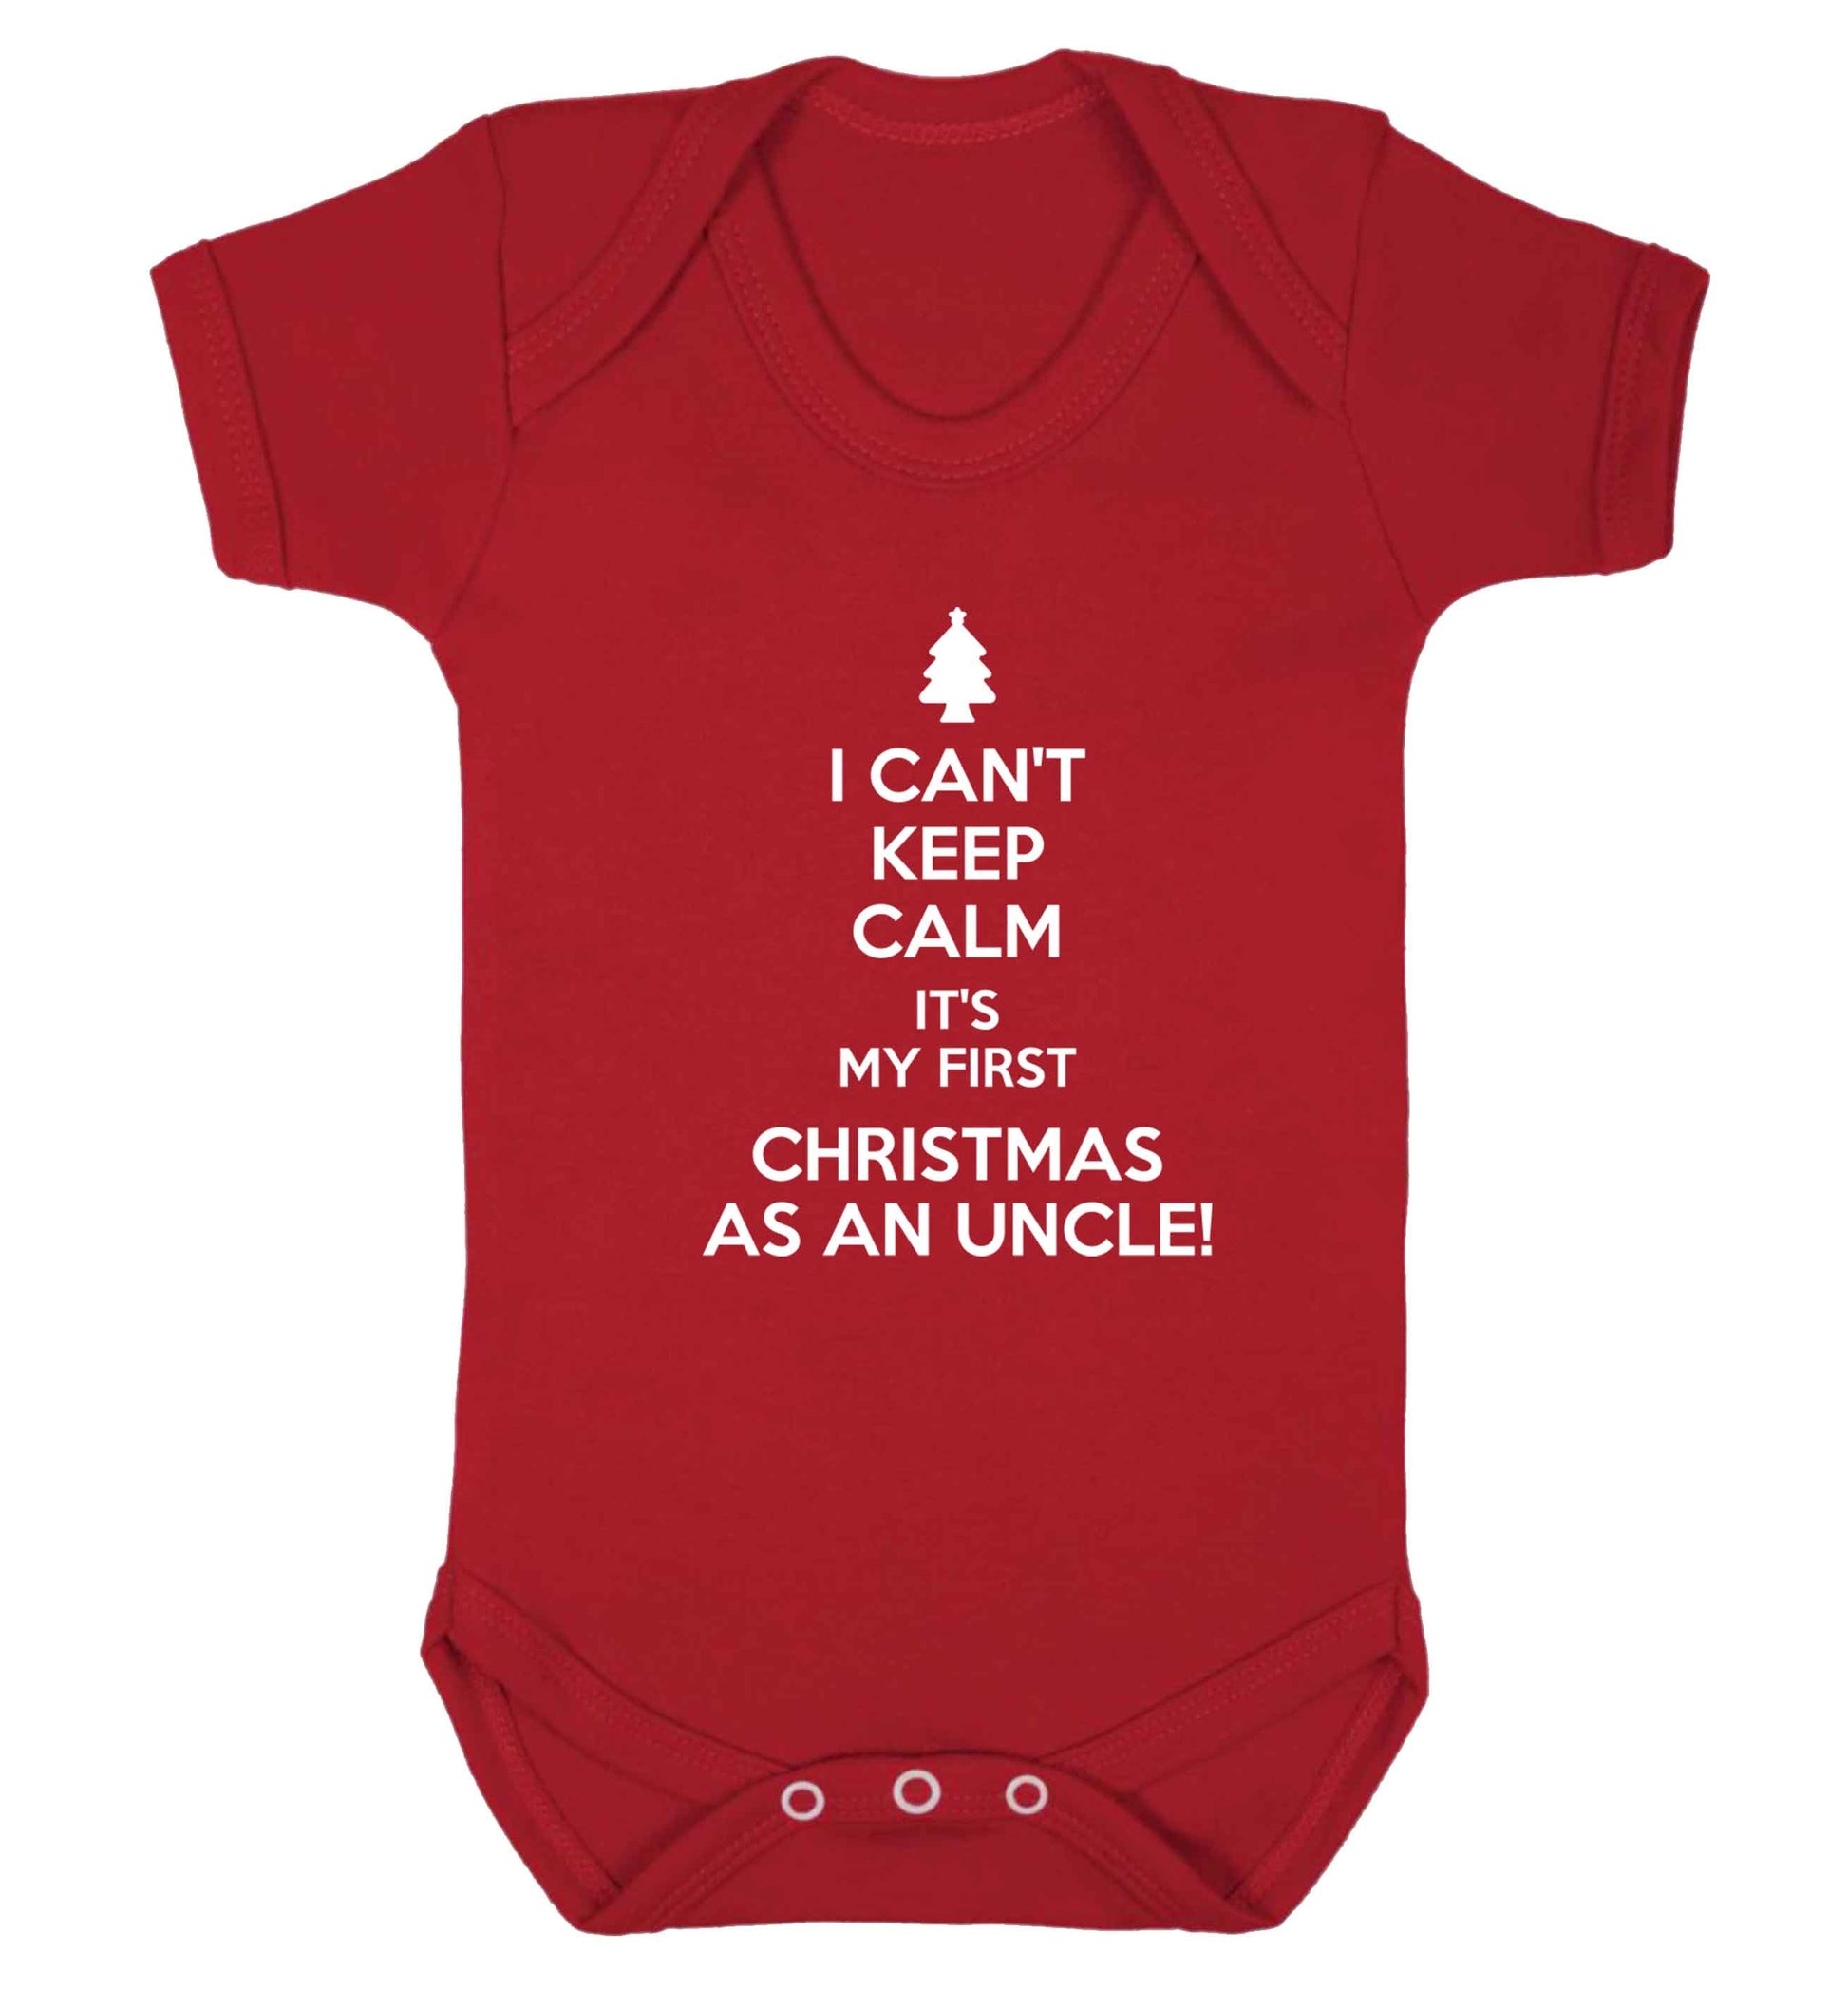 I can't keep calm it's my first Christmas as an uncle! Baby Vest red 18-24 months